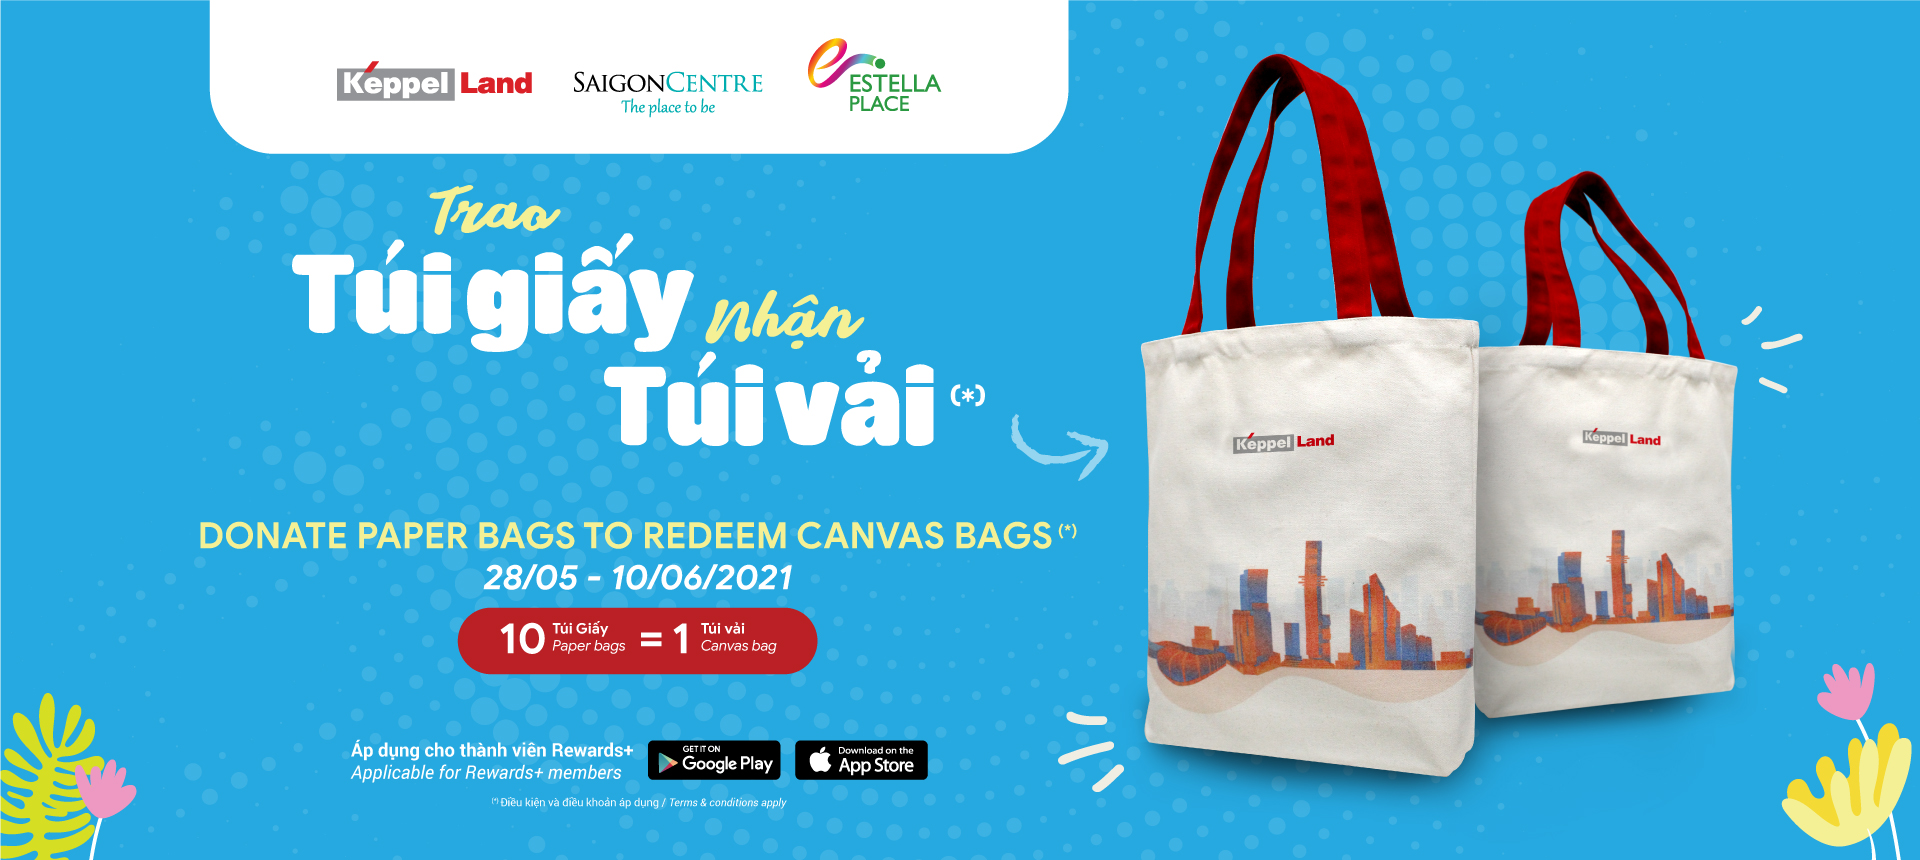 DONATE PAPER BAGS TO REDEEM CANVAS BAGS